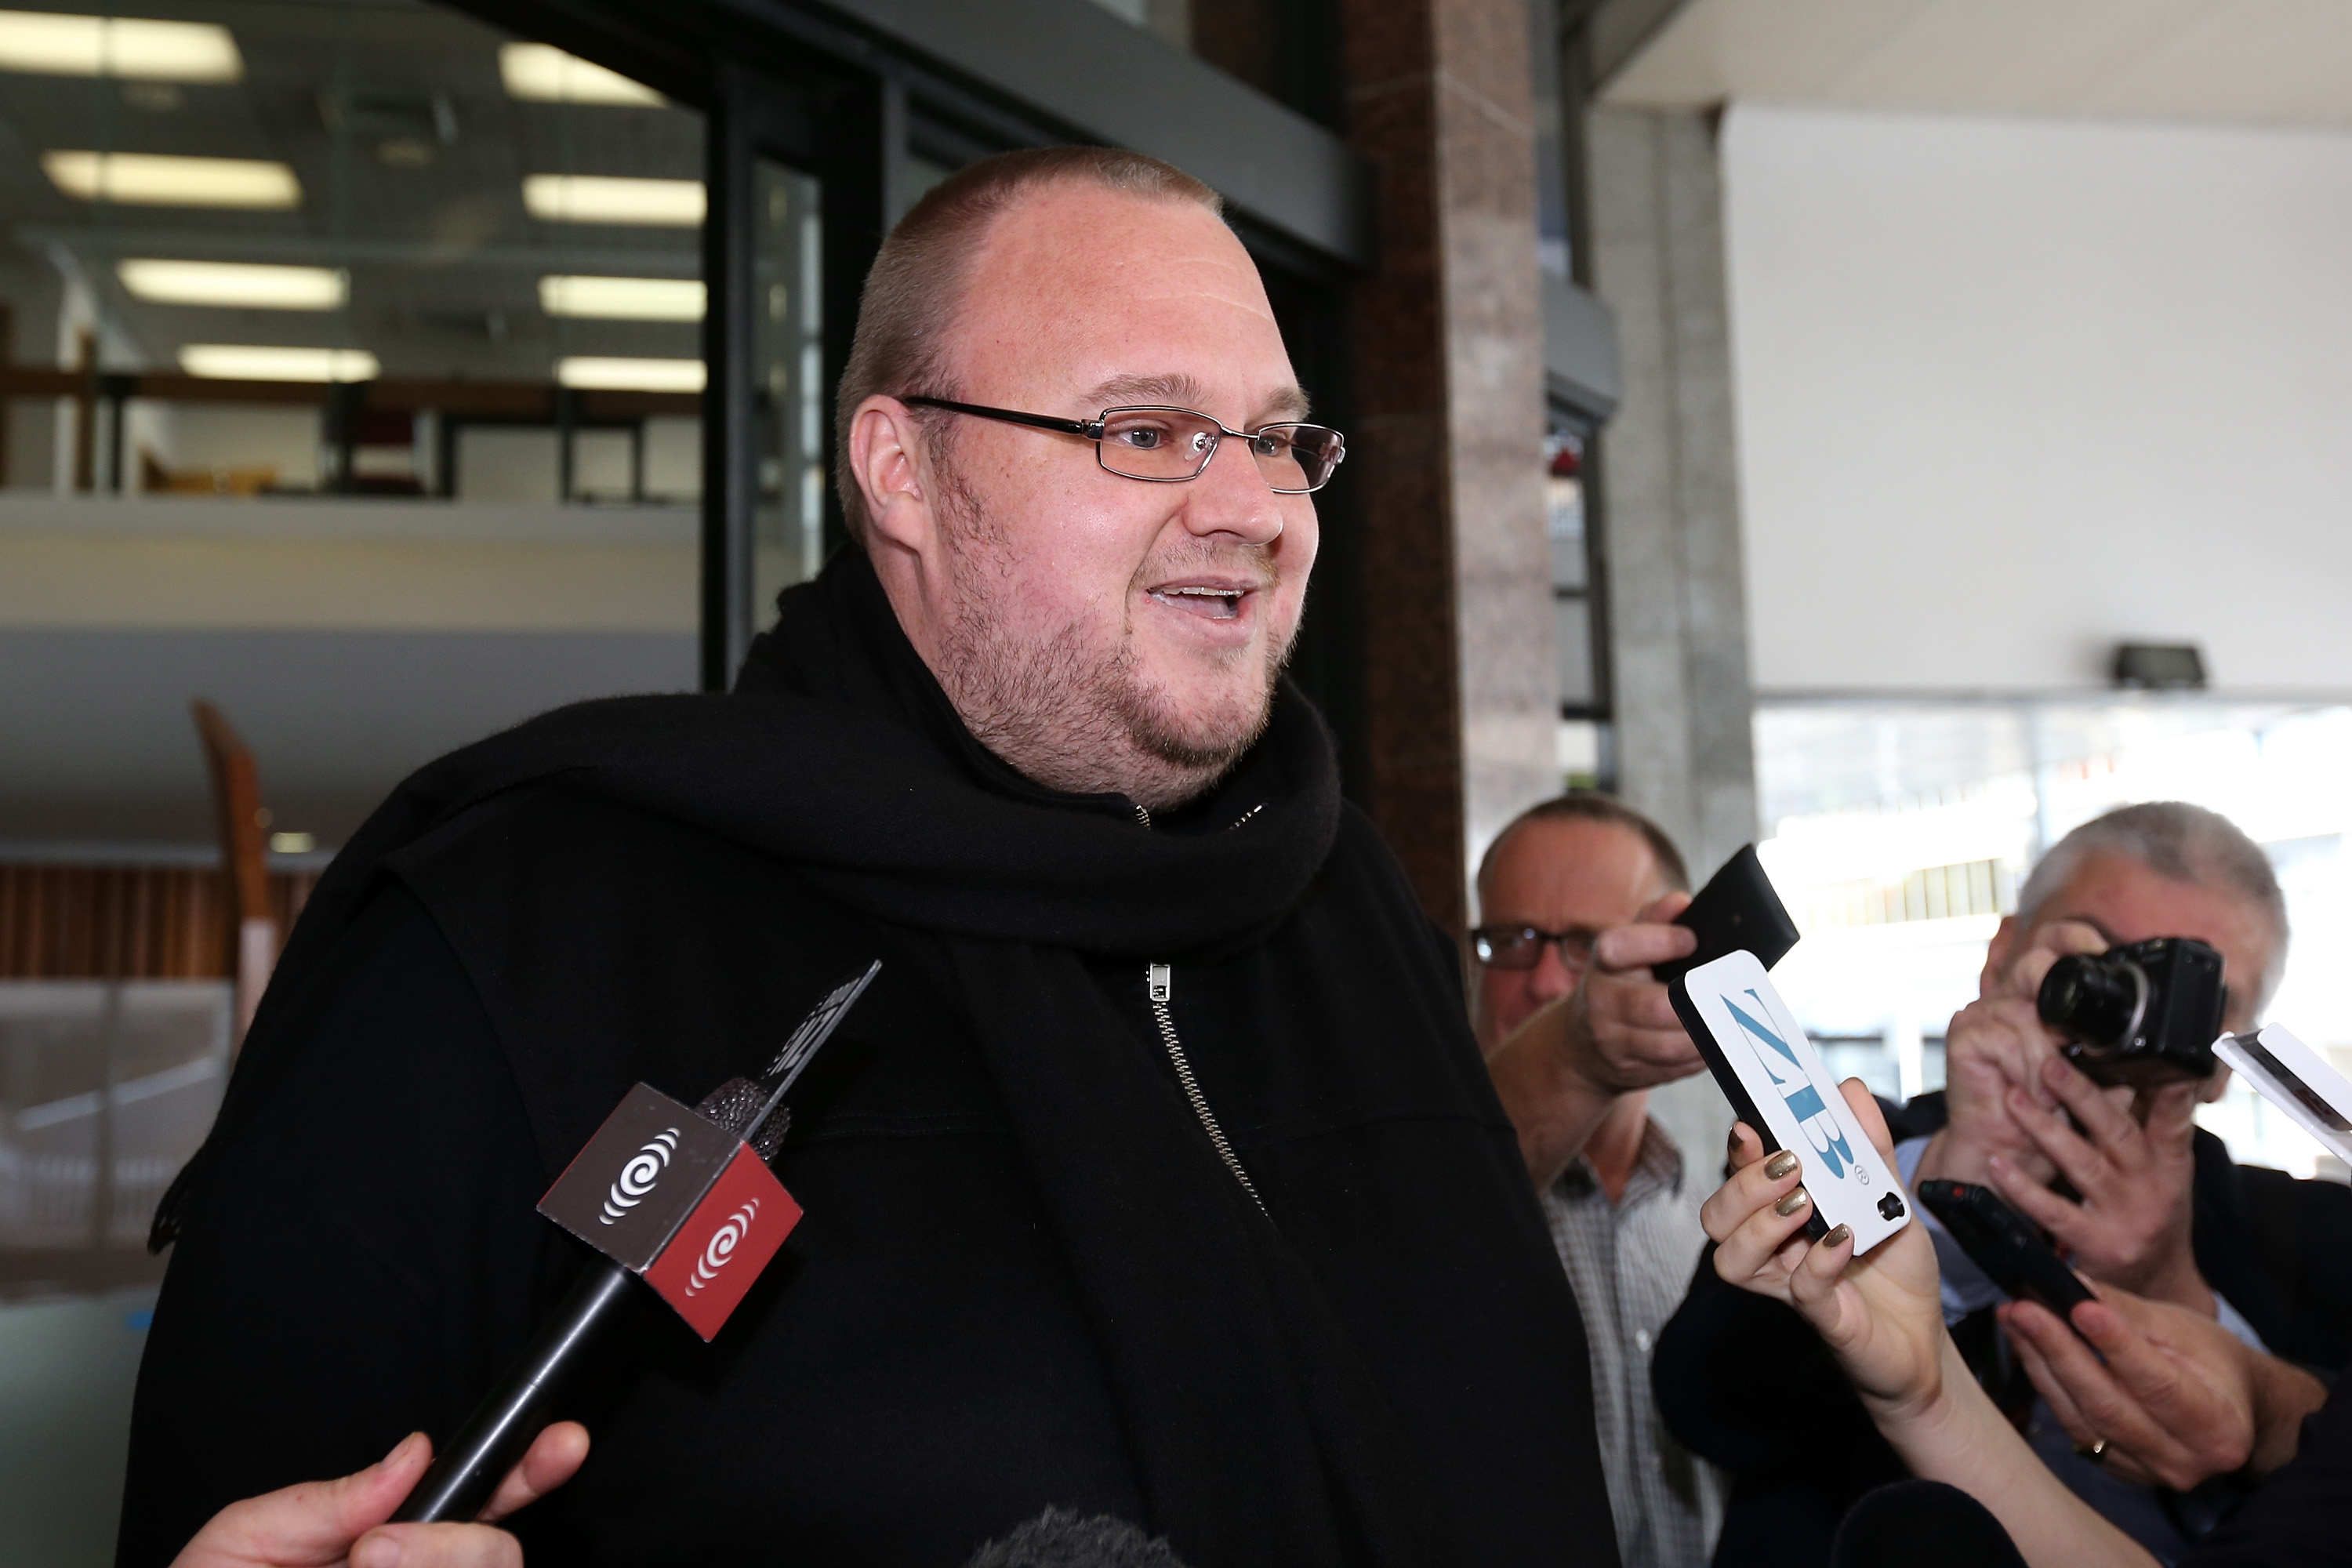 Kim Dotcom outside New Zealand's Auckland District Court, Dec. 1, 2014. (Fiona Goodall—Getty Images)